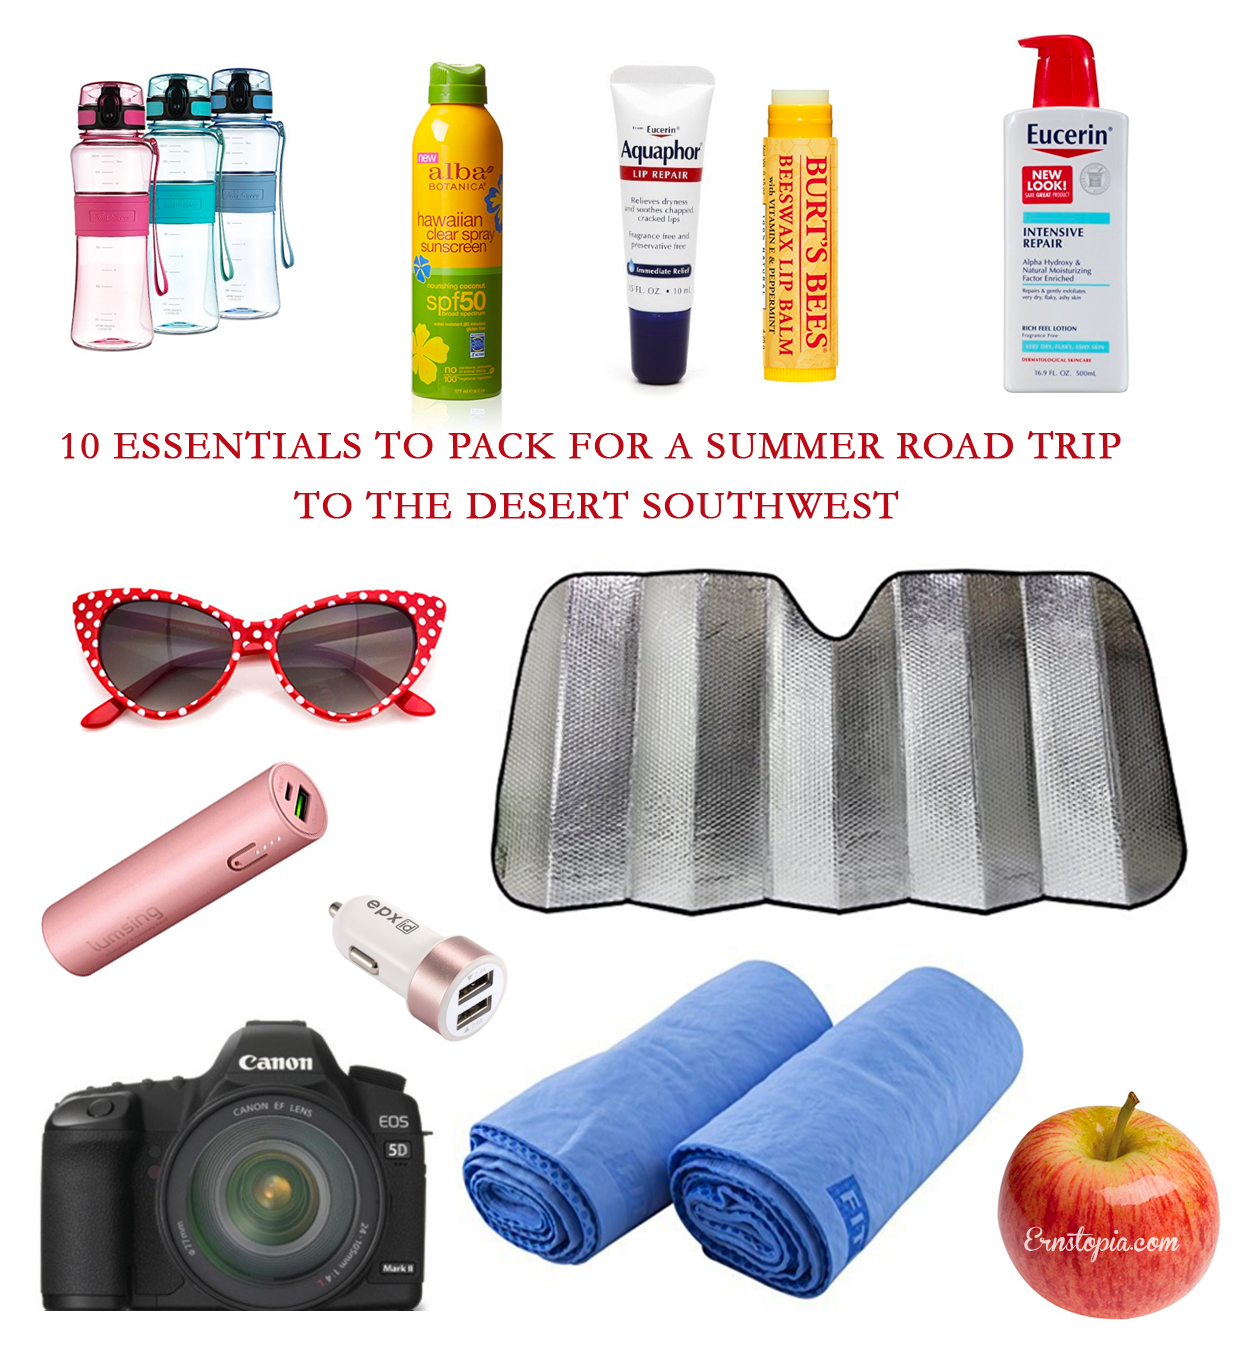 Road trip essentials you need to pack